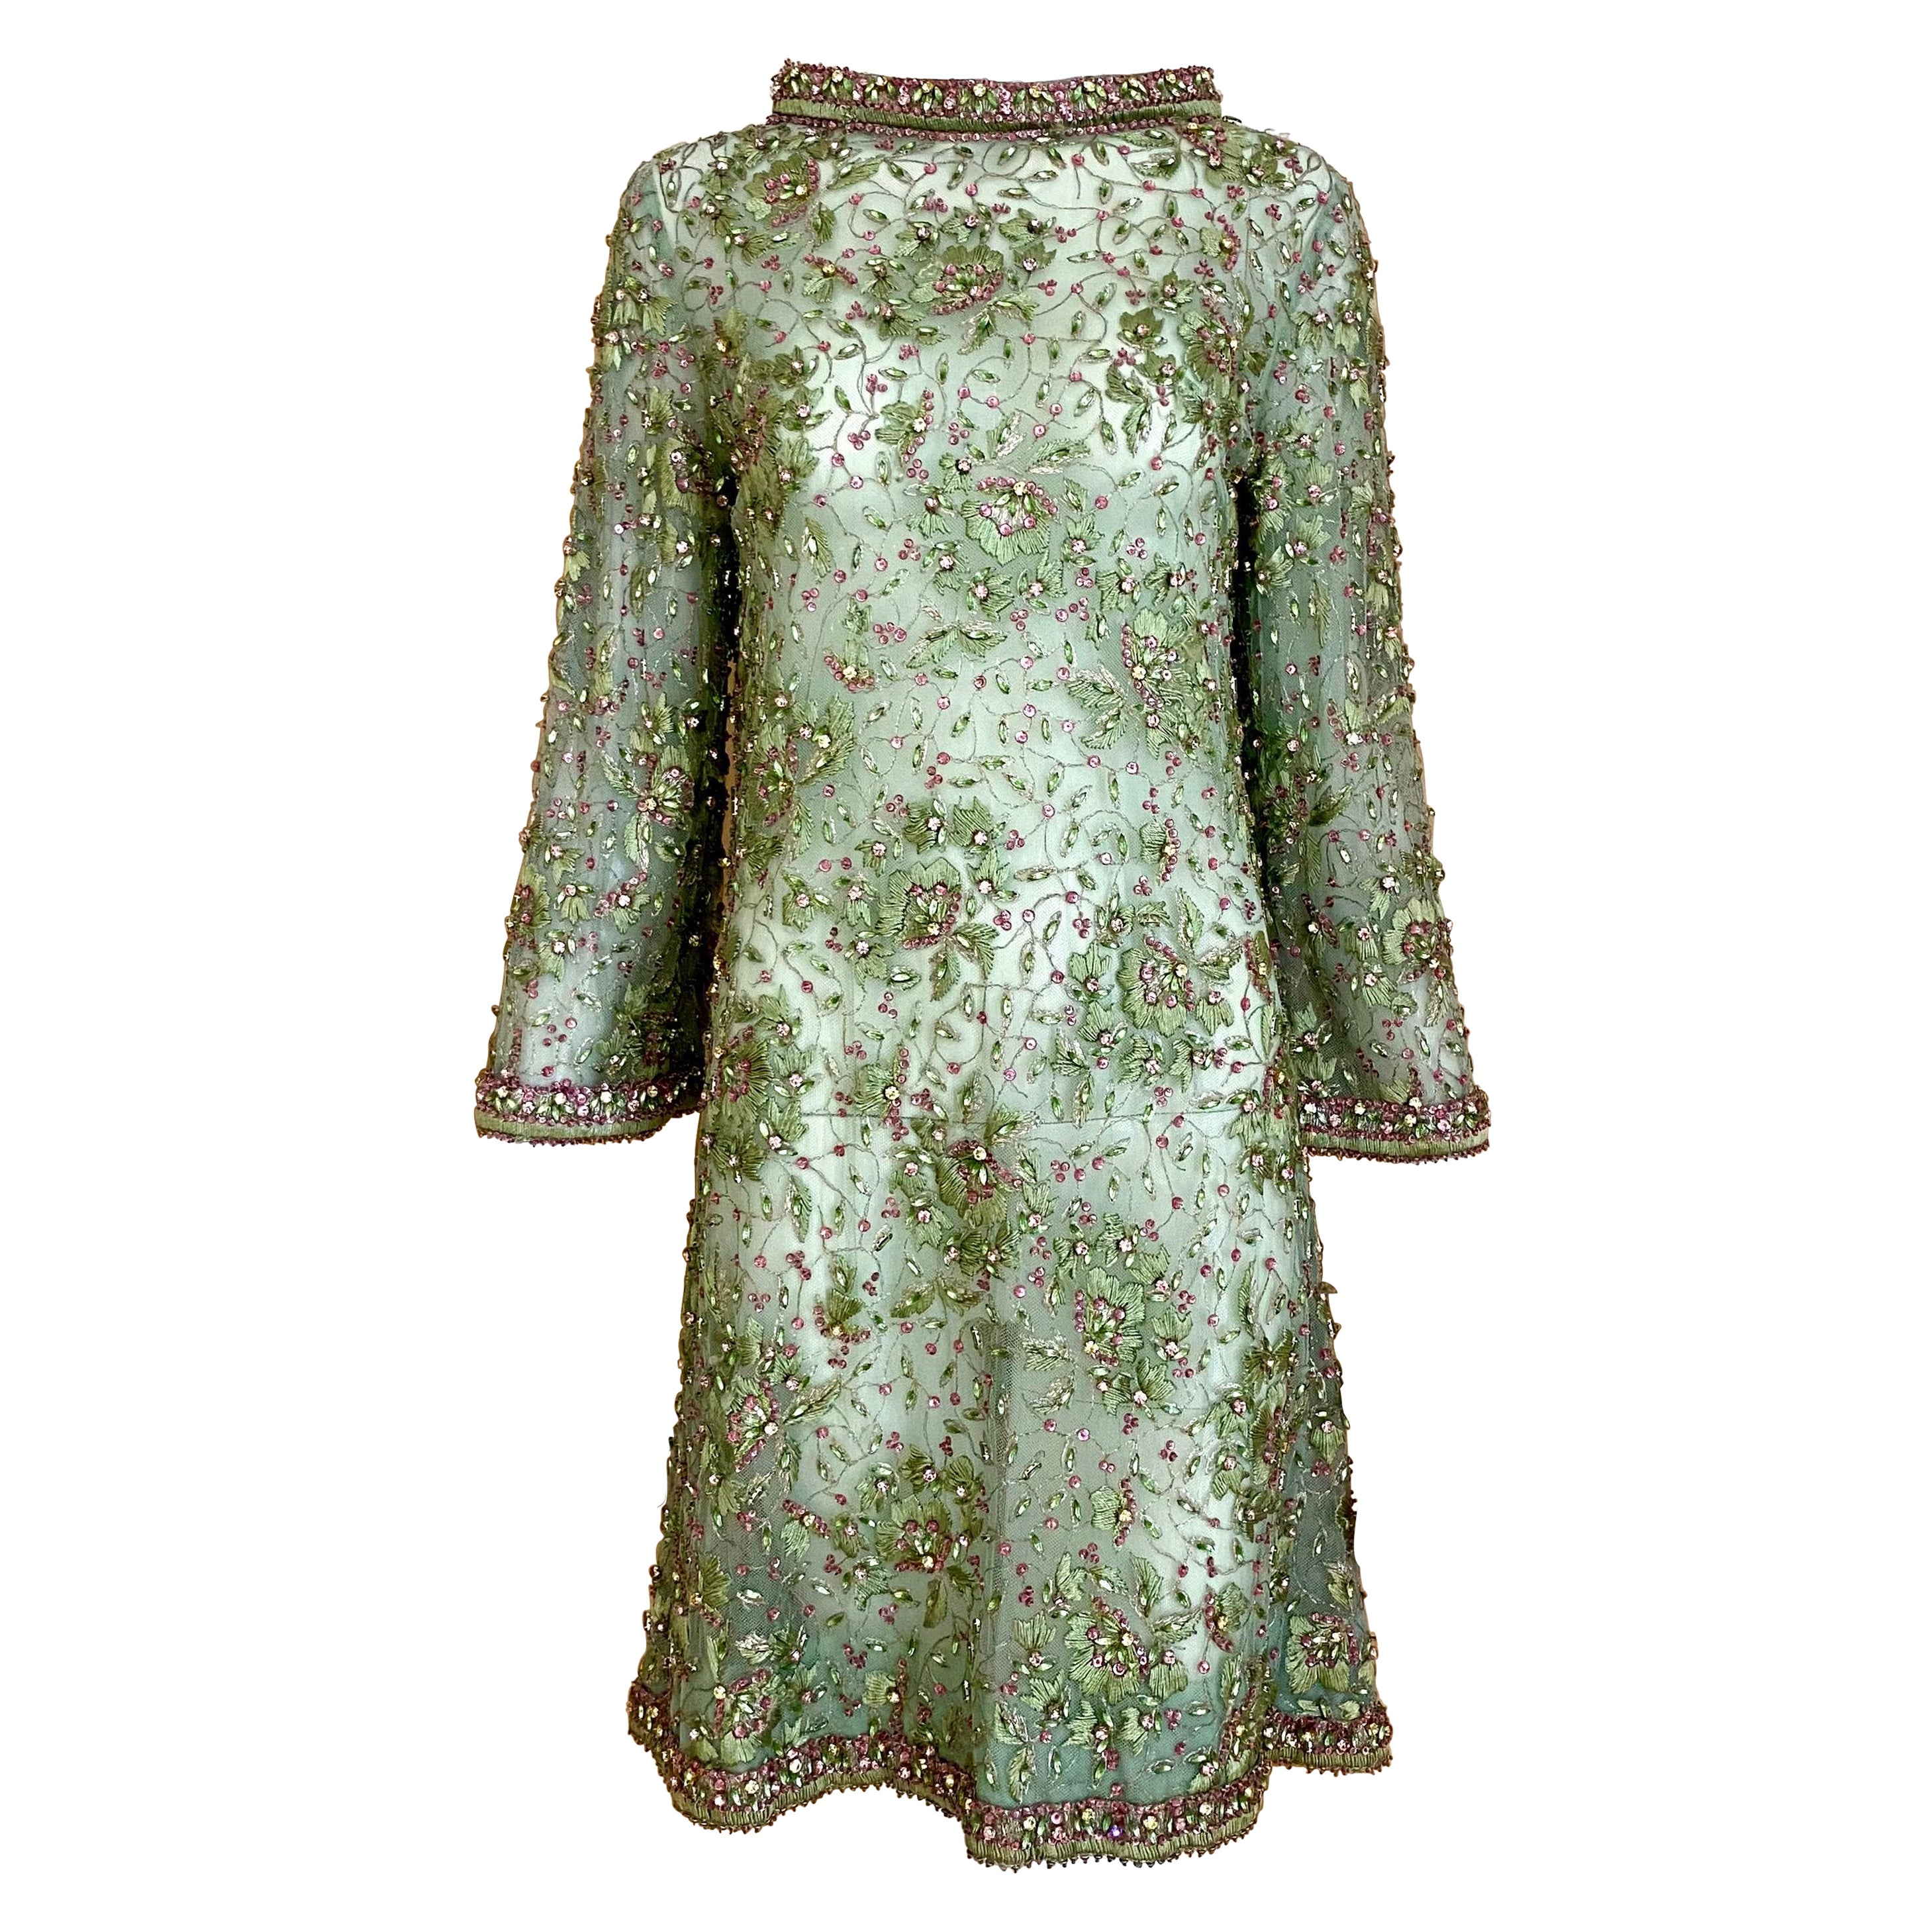 1960s Light Green Cocktail  Dress embellished with Rhinestones 